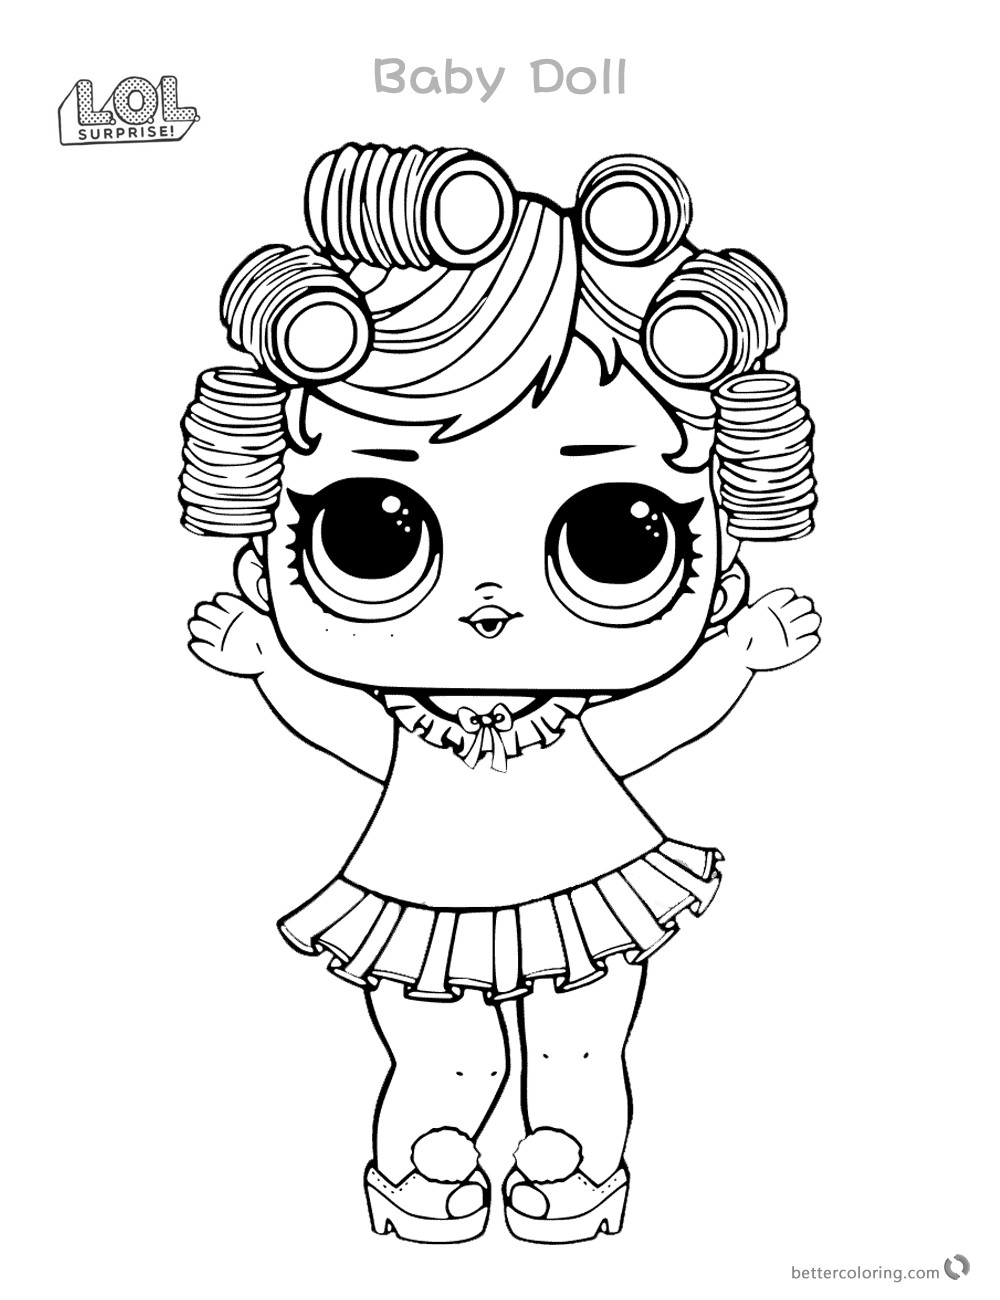 Lol Doll Coloring Pages Printable
 Lol Dolls Coloring Pages at GetDrawings